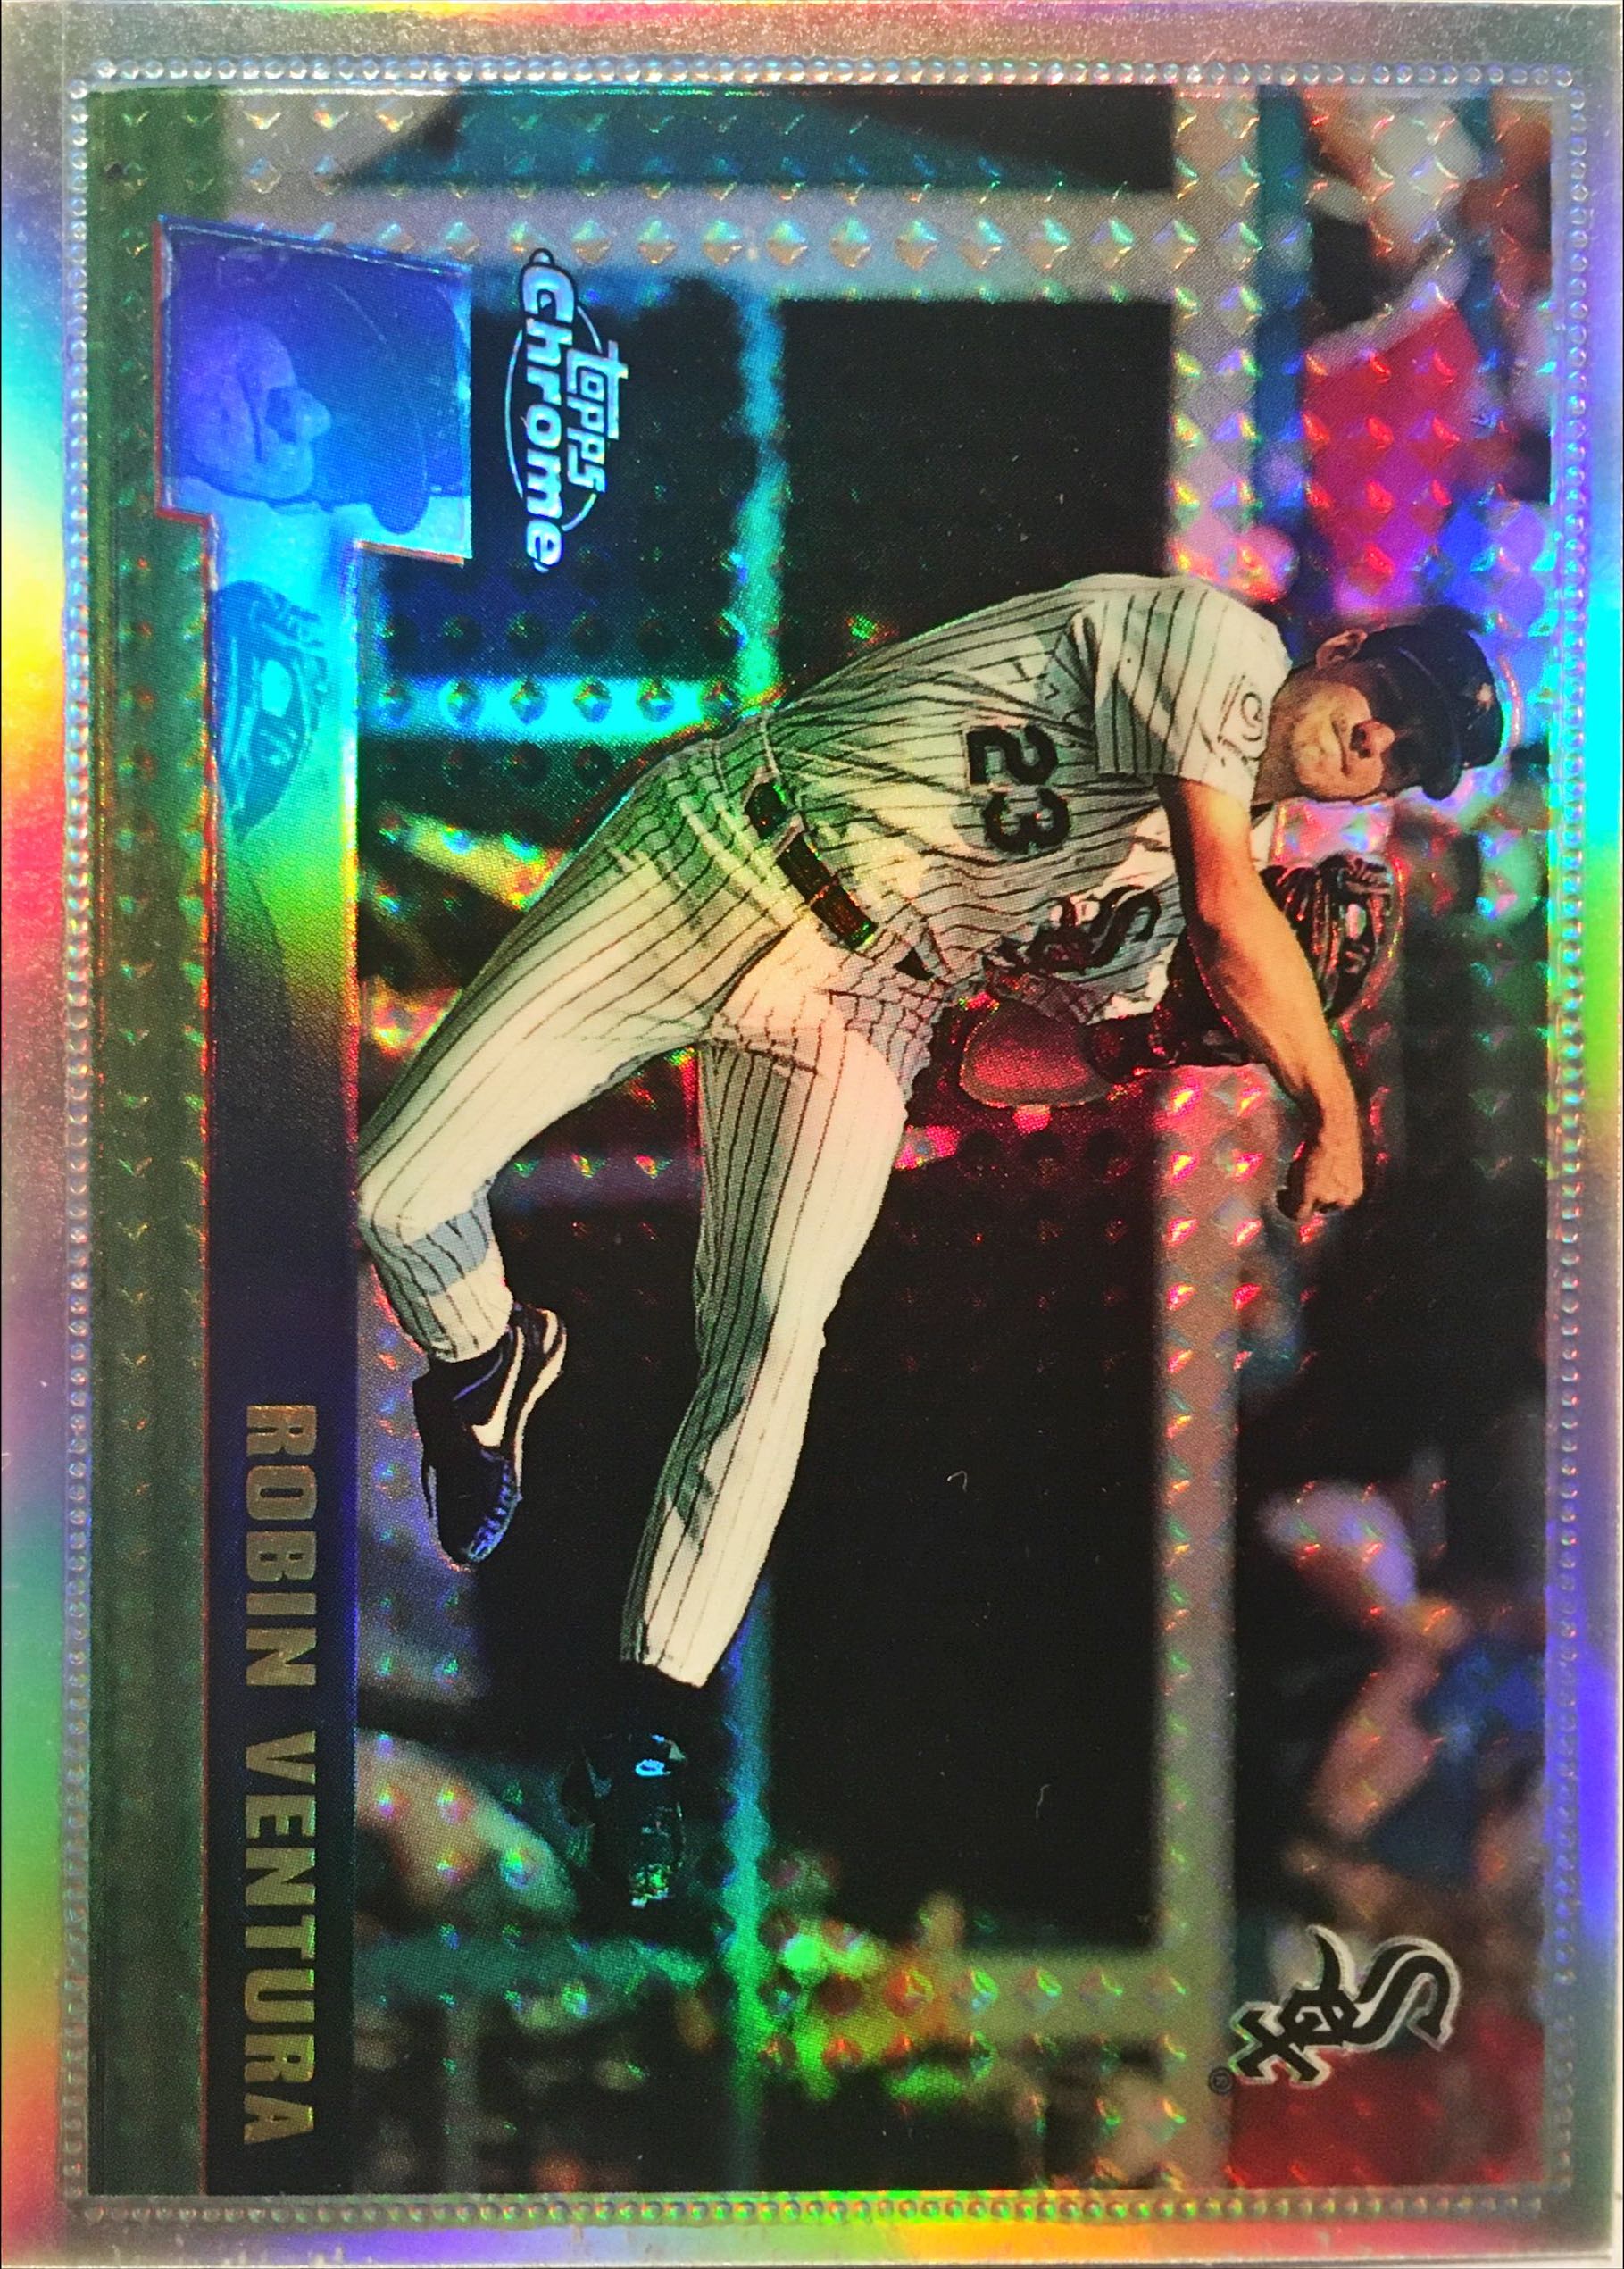 1996 Topps Chrome Refreactors 124 front image